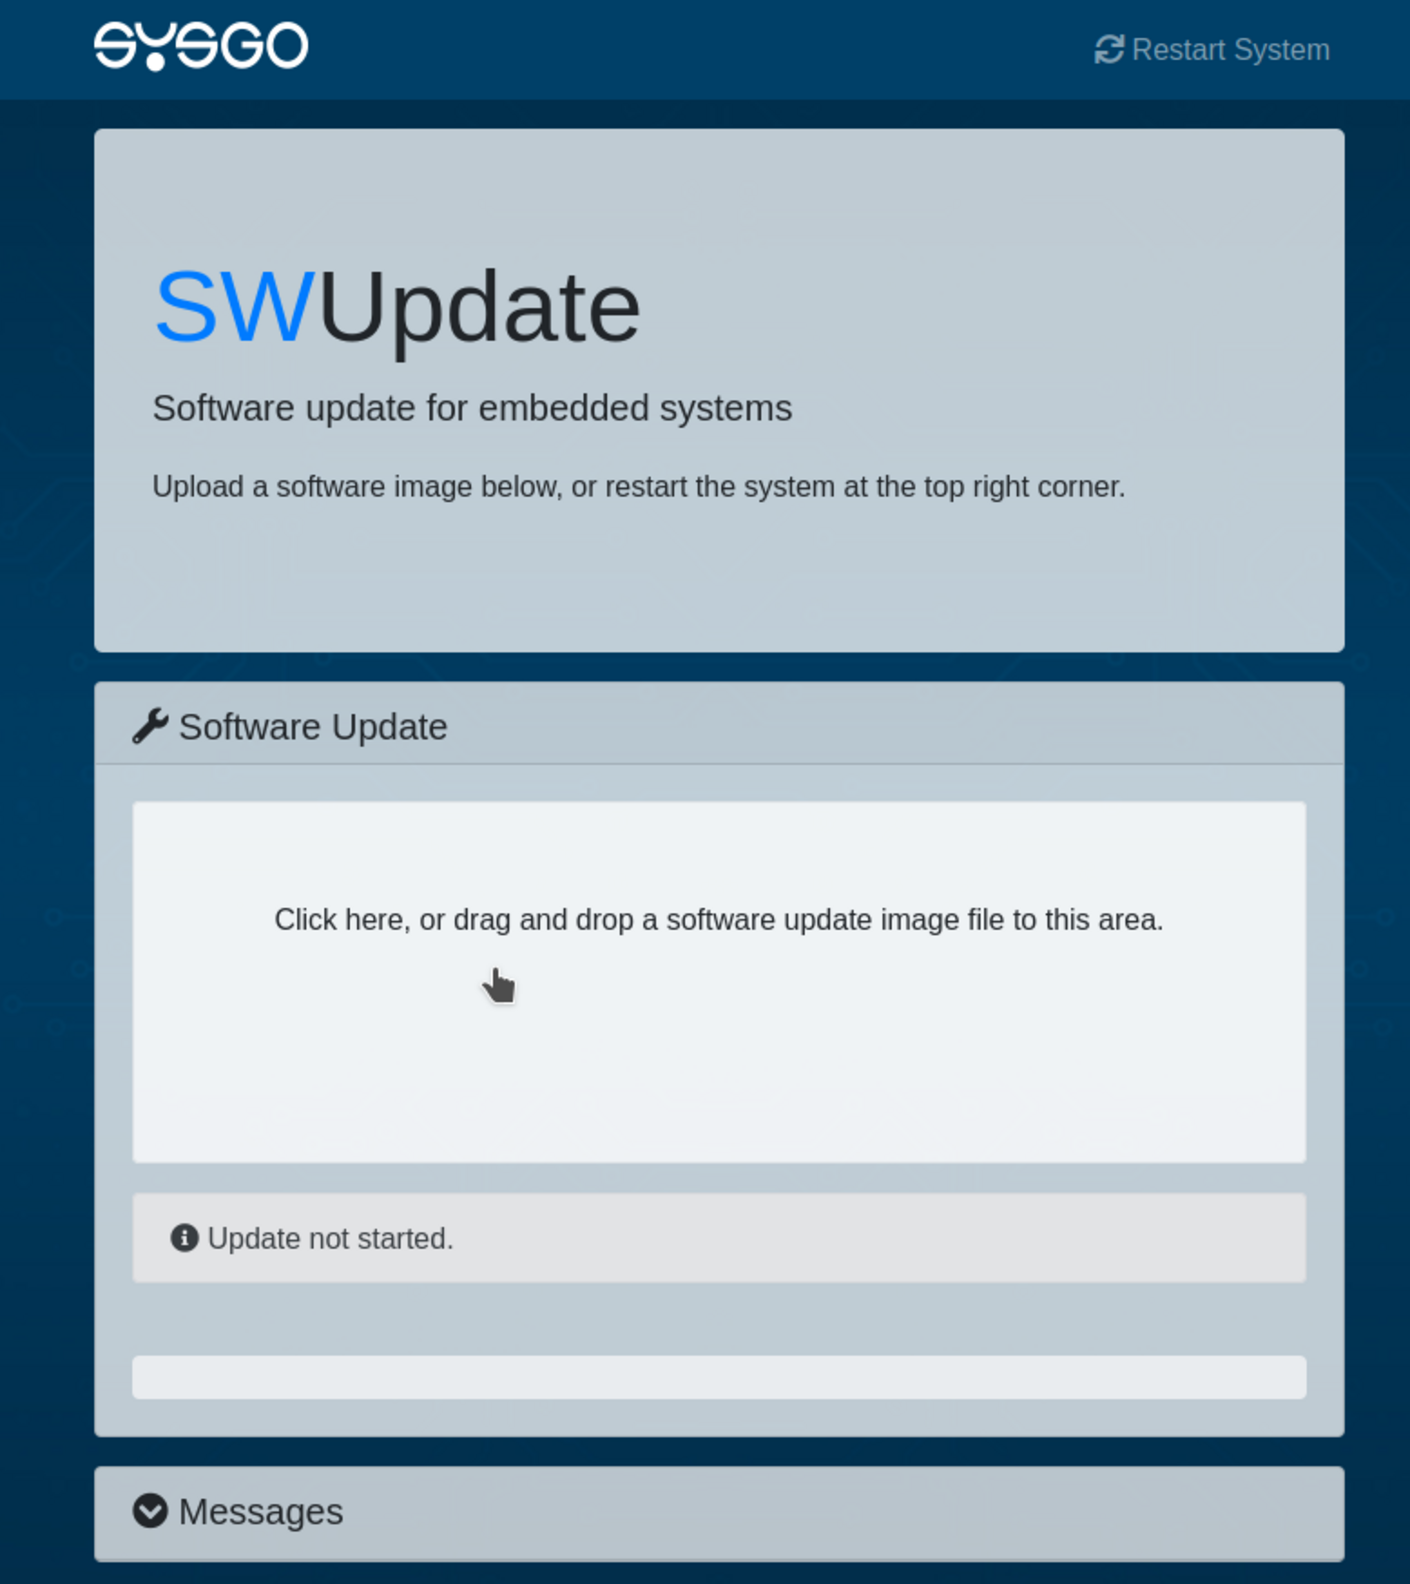 SWUpdate for embedded systems